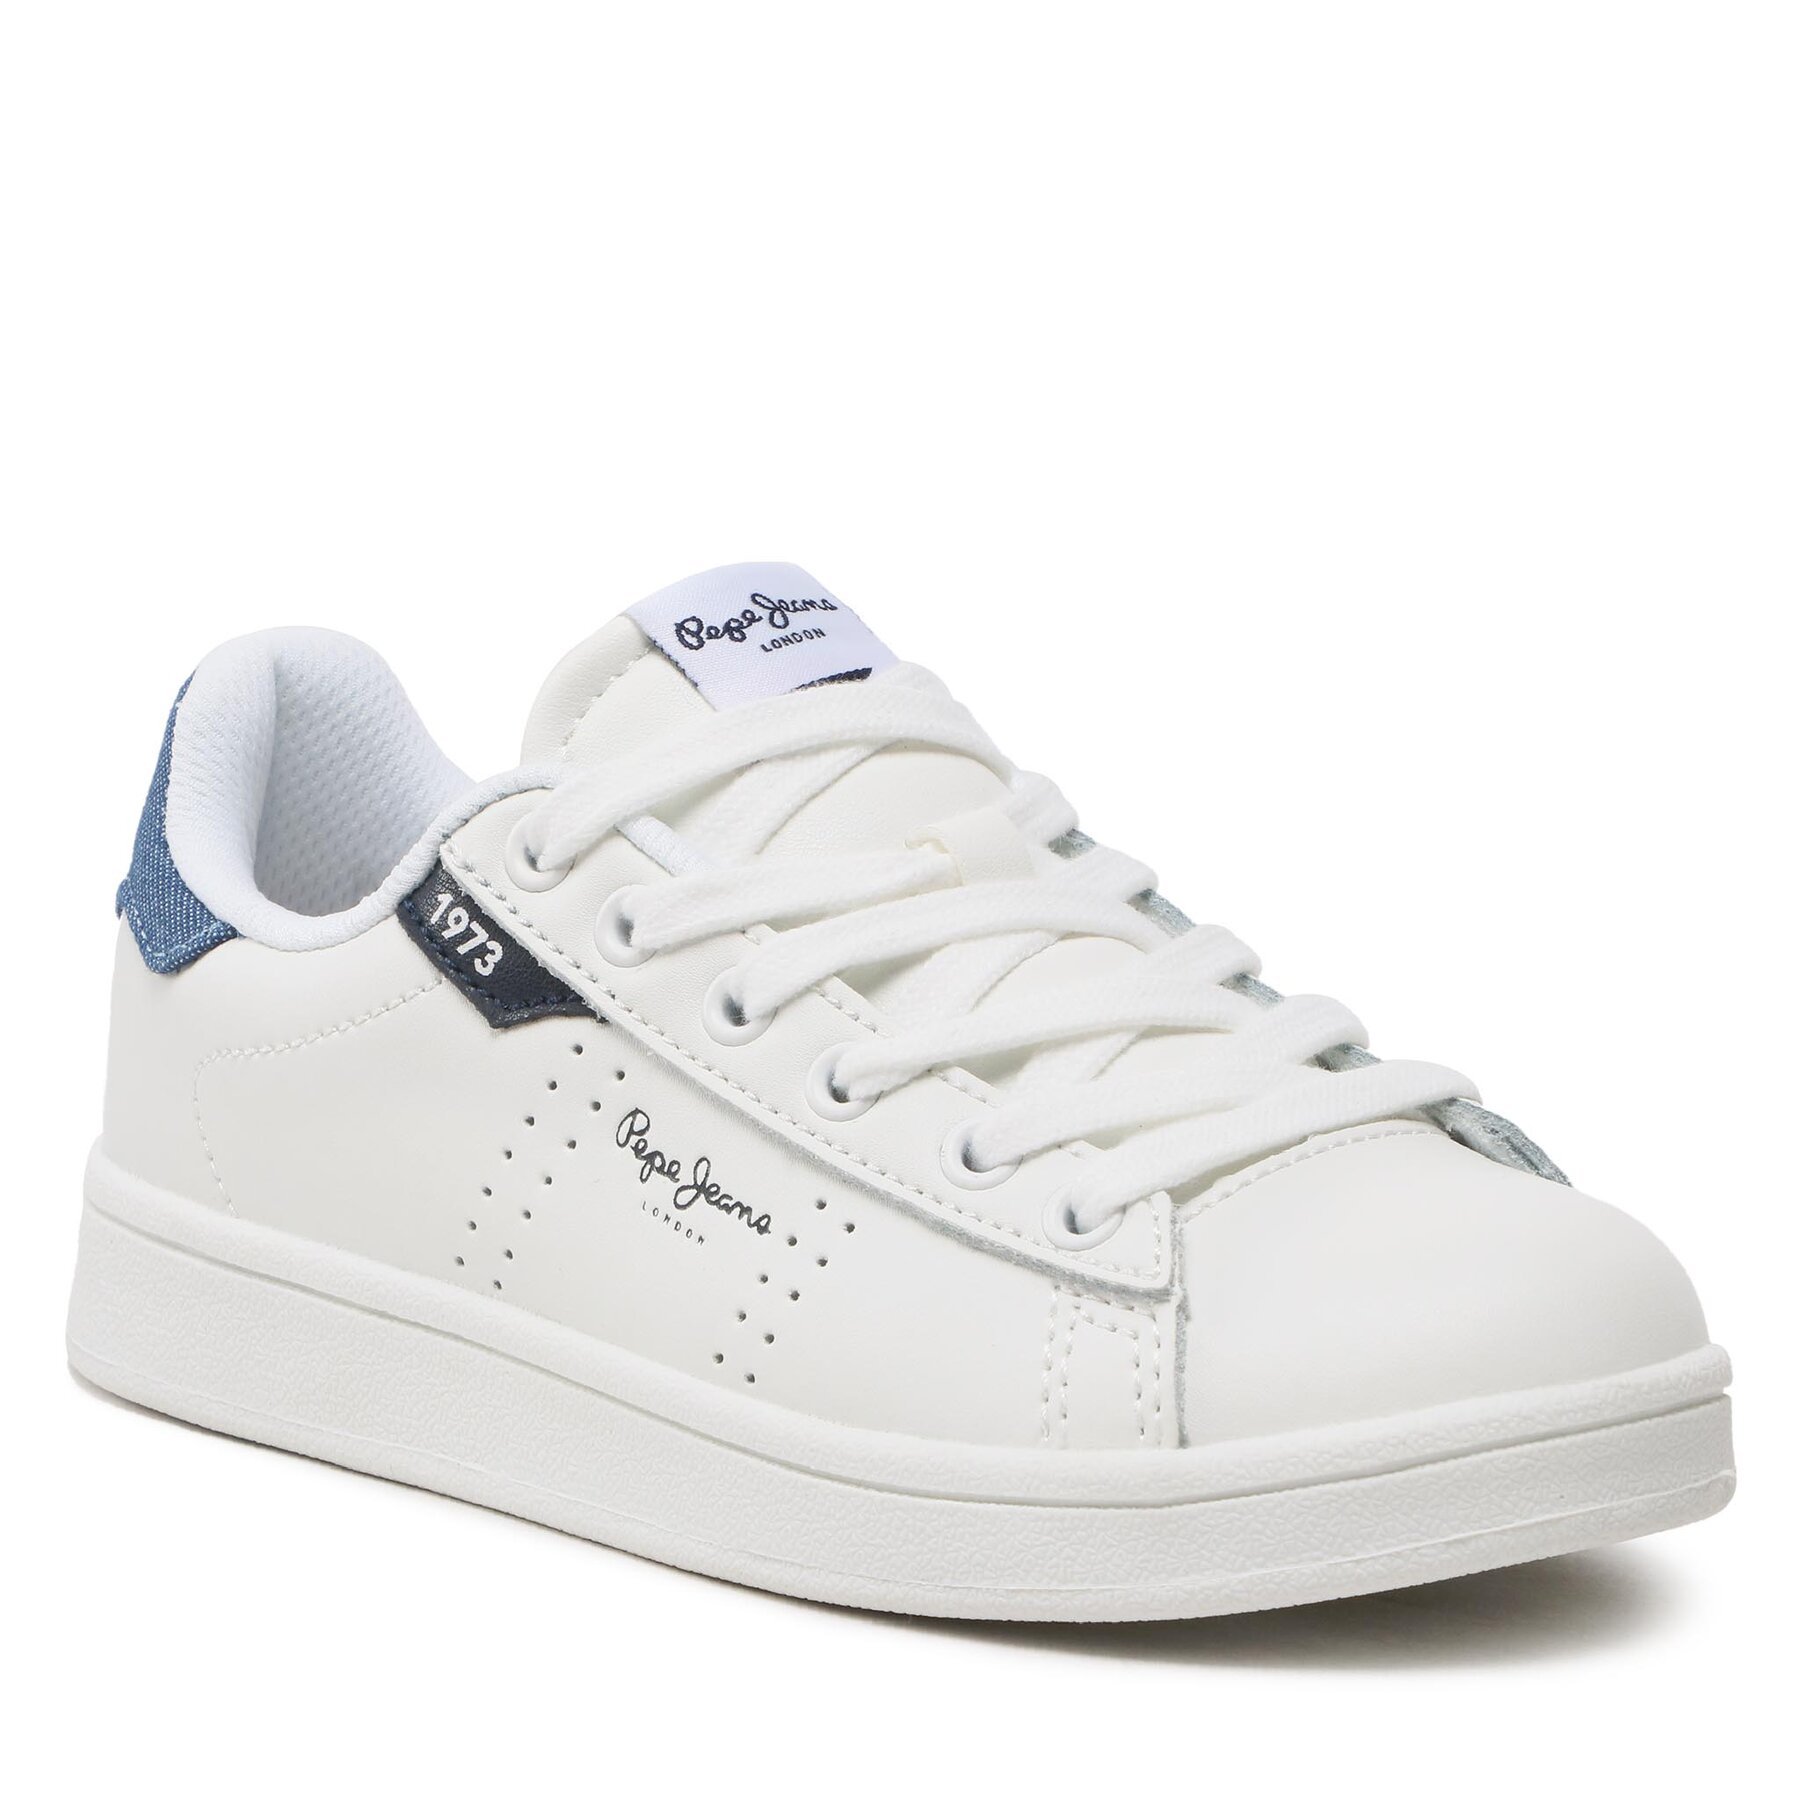 Sneakers Pepe Jeans Player Basic B Jeans PBS30545 White 800 800 imagine super redus 2022